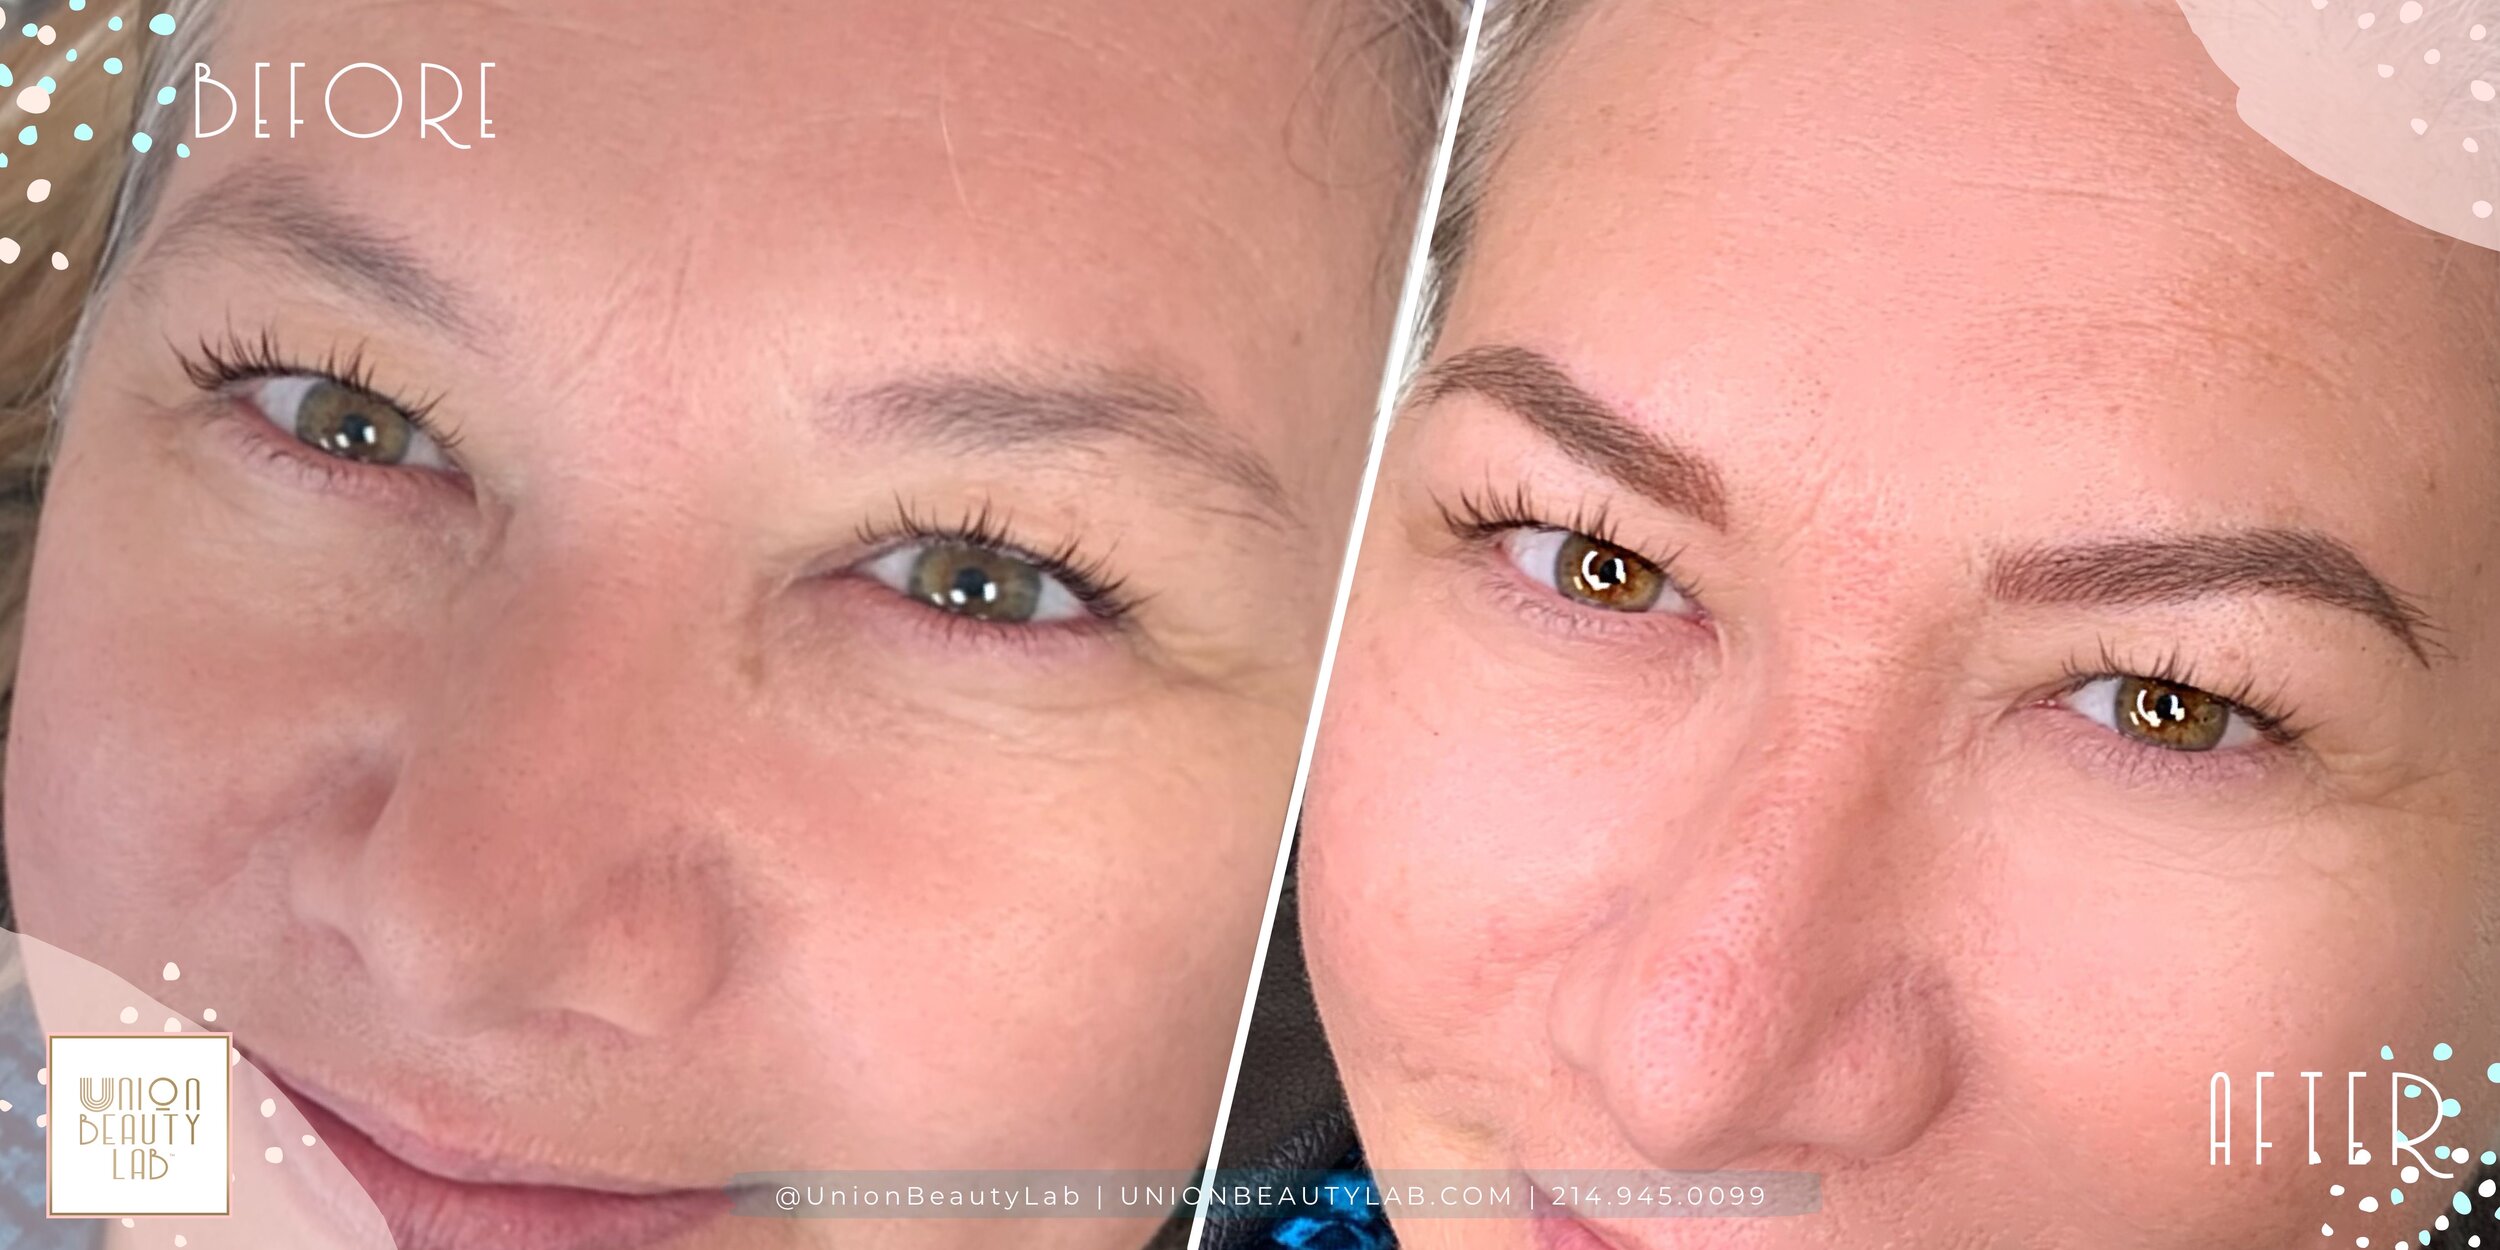 2149450099 Union Beauty Lab Advanced Microblading Cosmetic Tattooing Dallas Mature 27.JPG